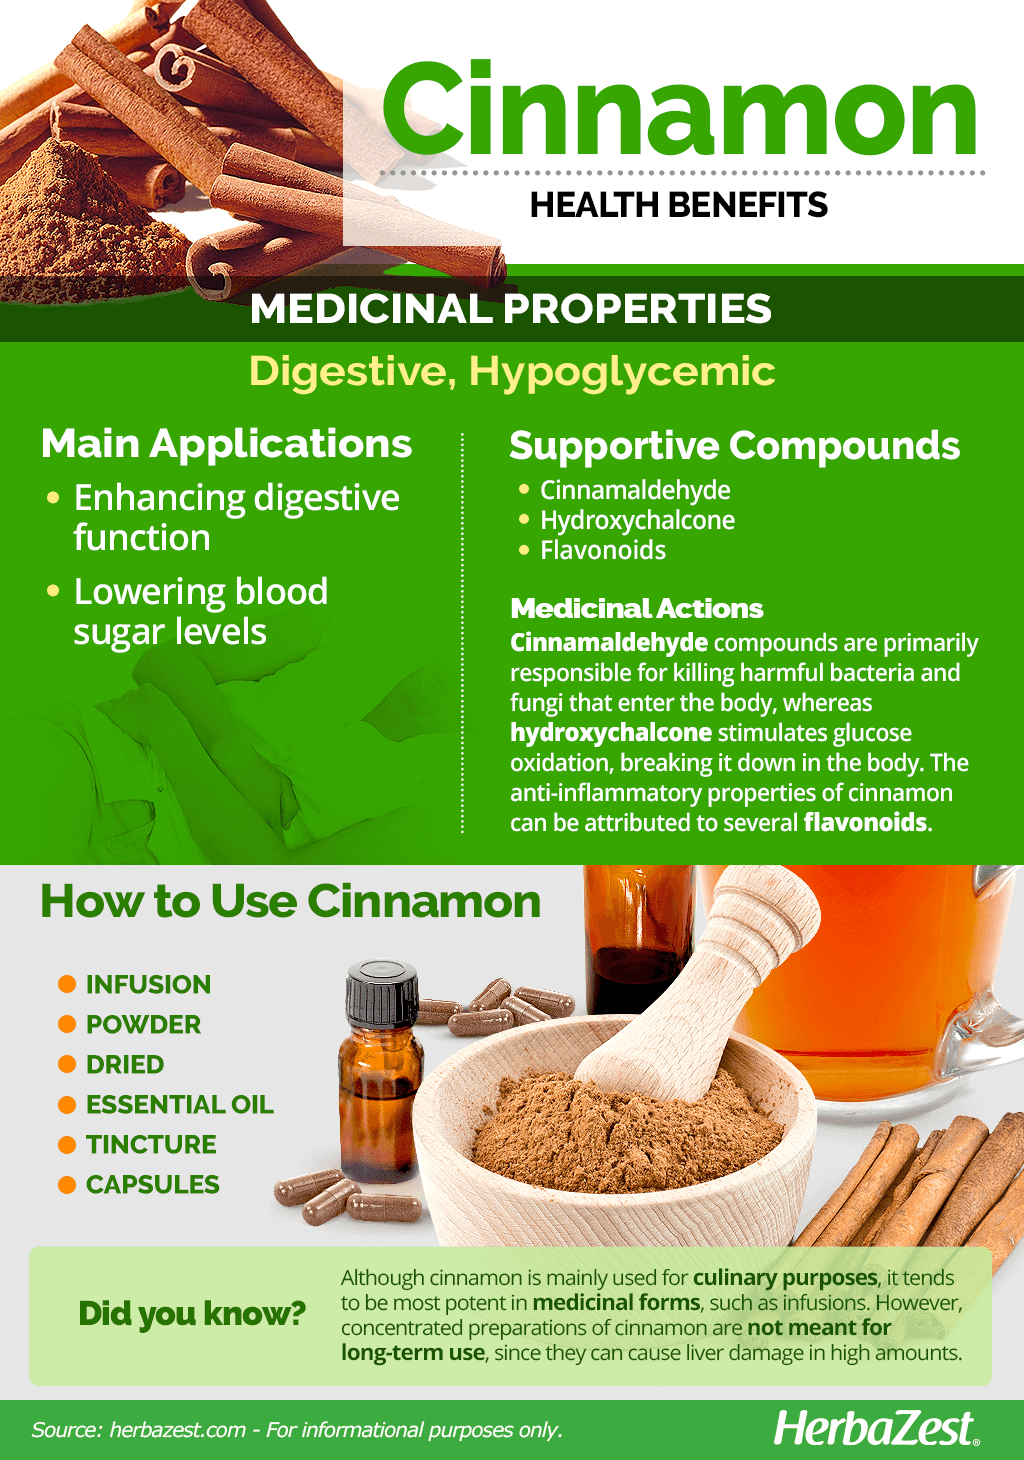 All About Cinnamon